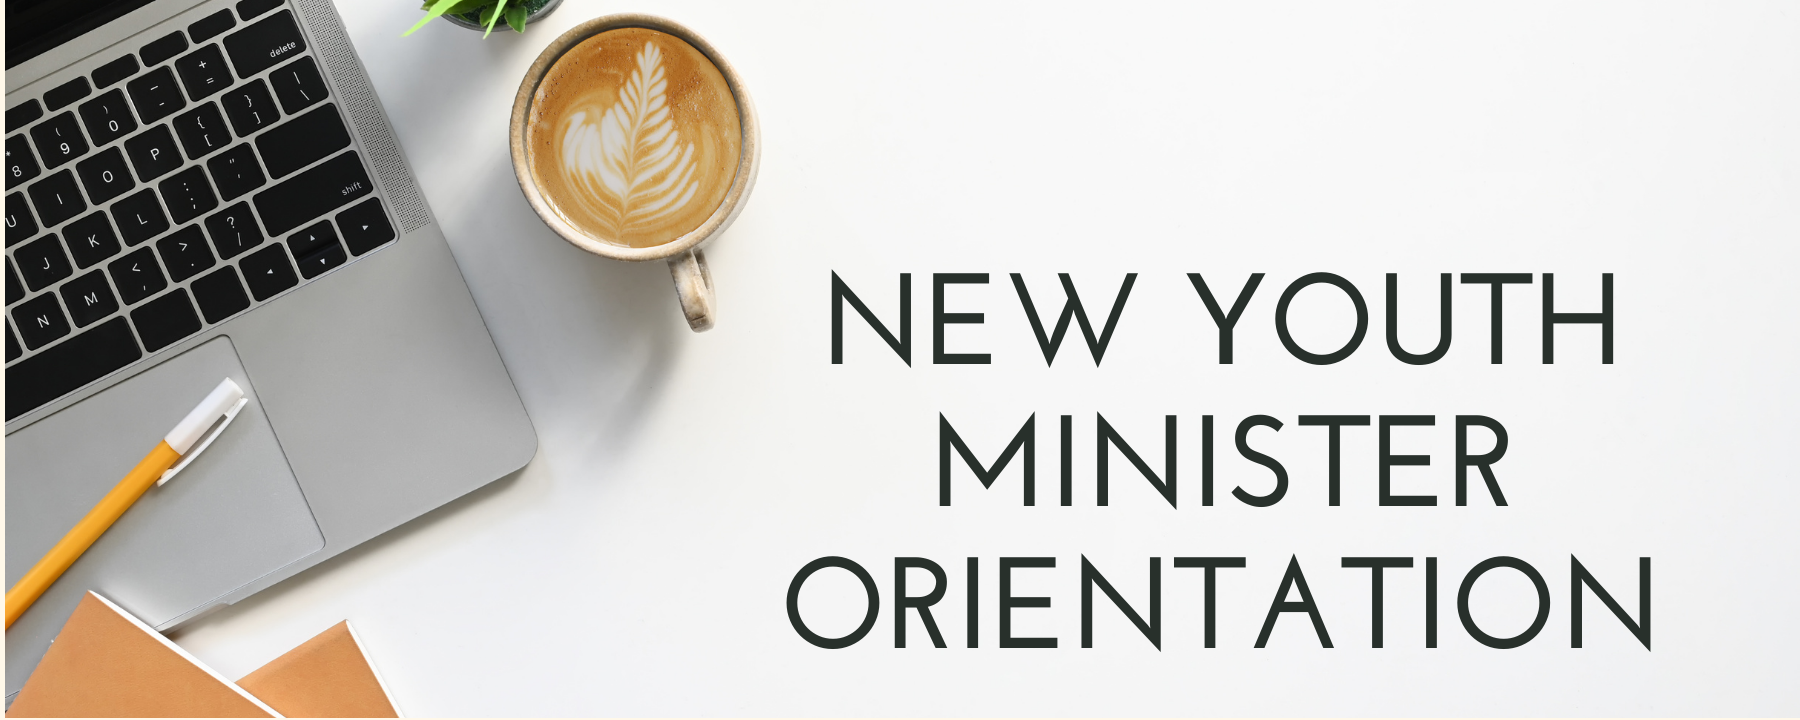 New Youth Minister Orientation